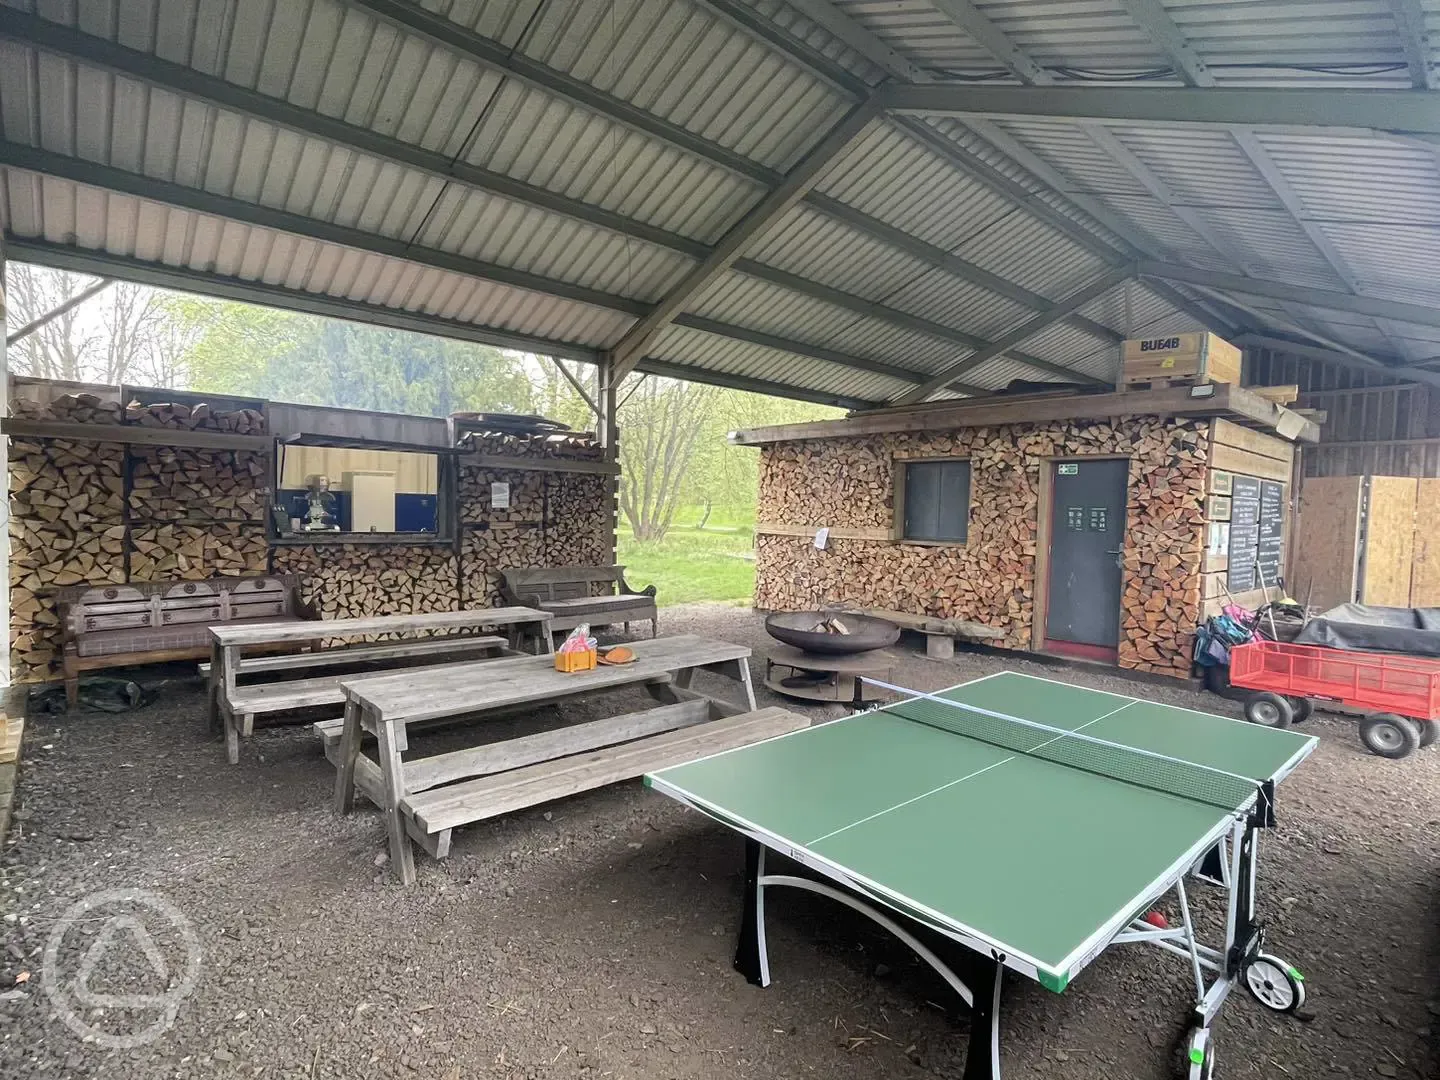 Communal barn with table tennis